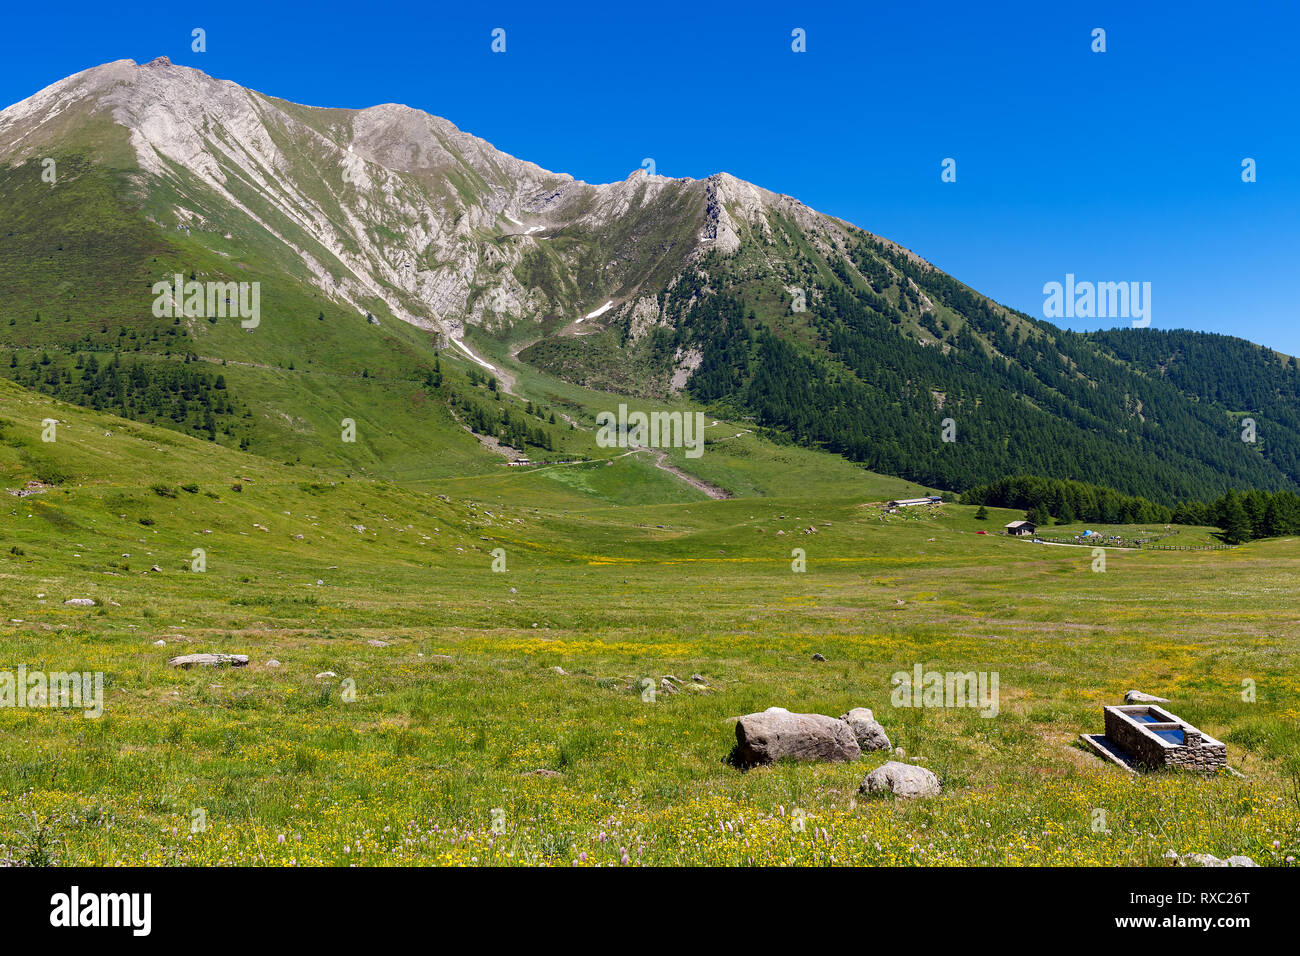 Green alpine meadow and mountains on background under blue sky in Piedmont, Northern Italy. Stock Photo